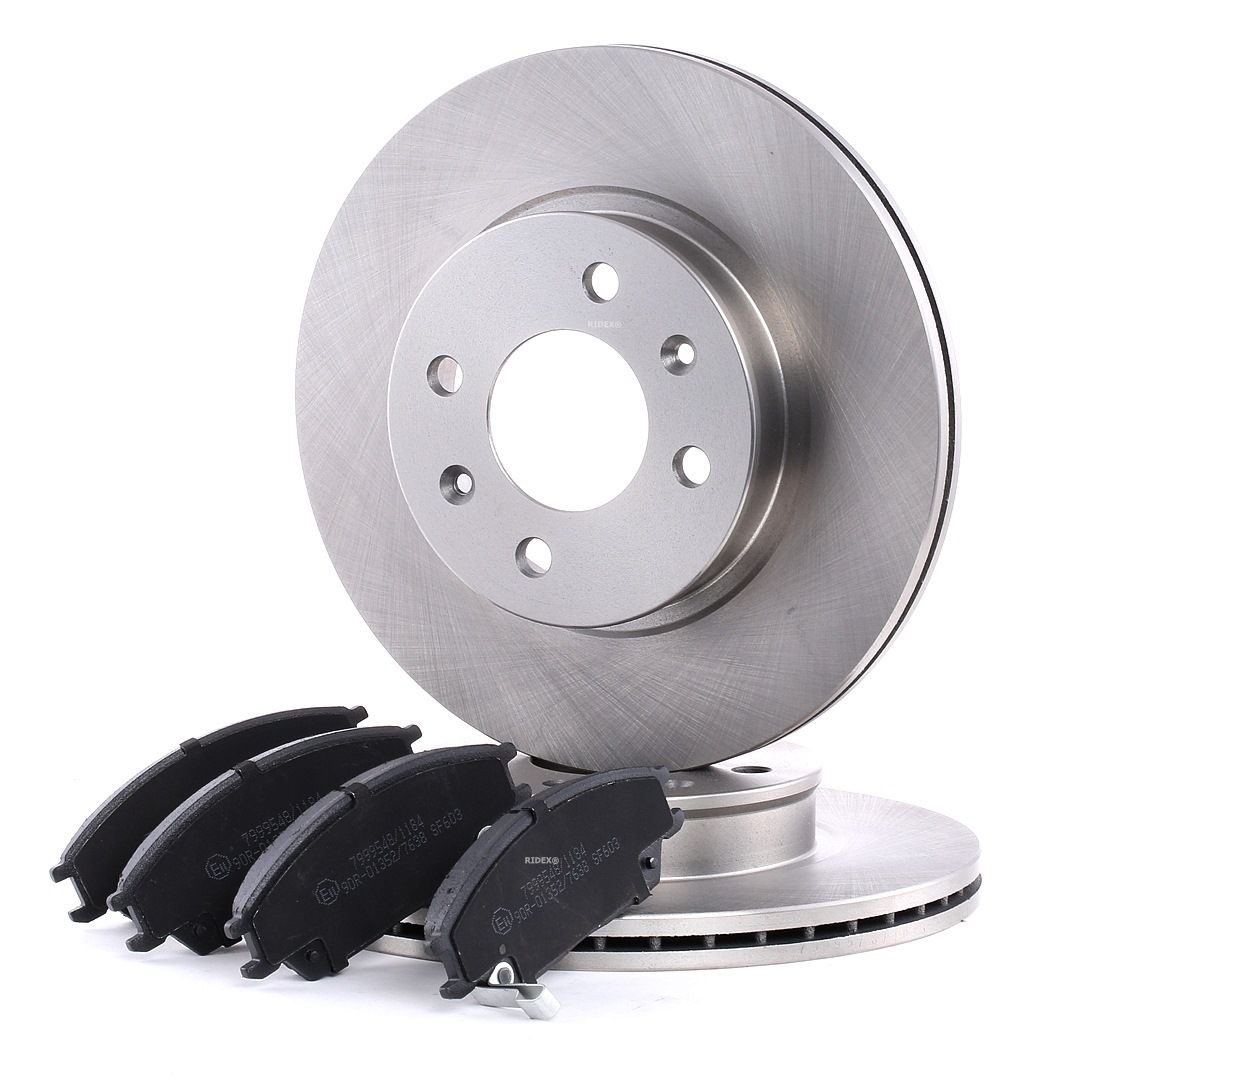 RIDEX 3405B0101 Brake discs and pads set Front Axle, Vented, with acoustic wear warning